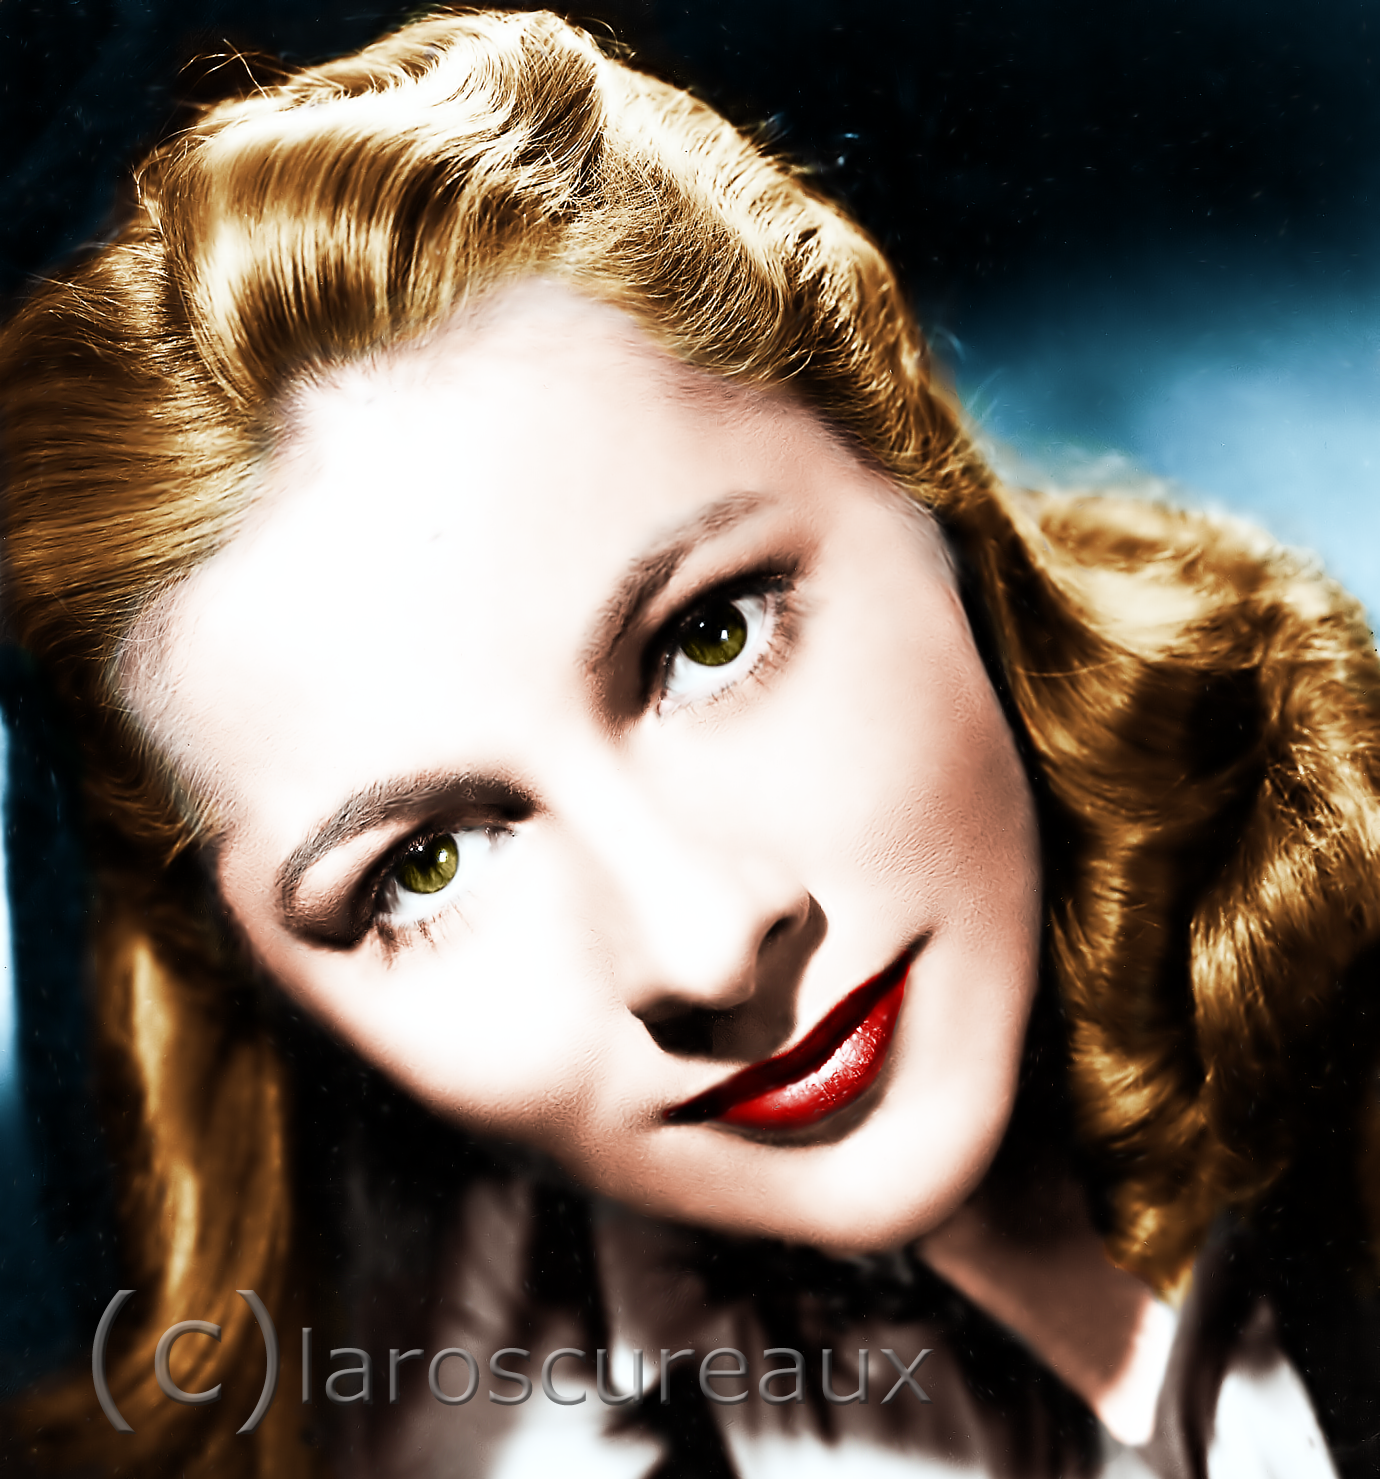 joan-fontaine-movies